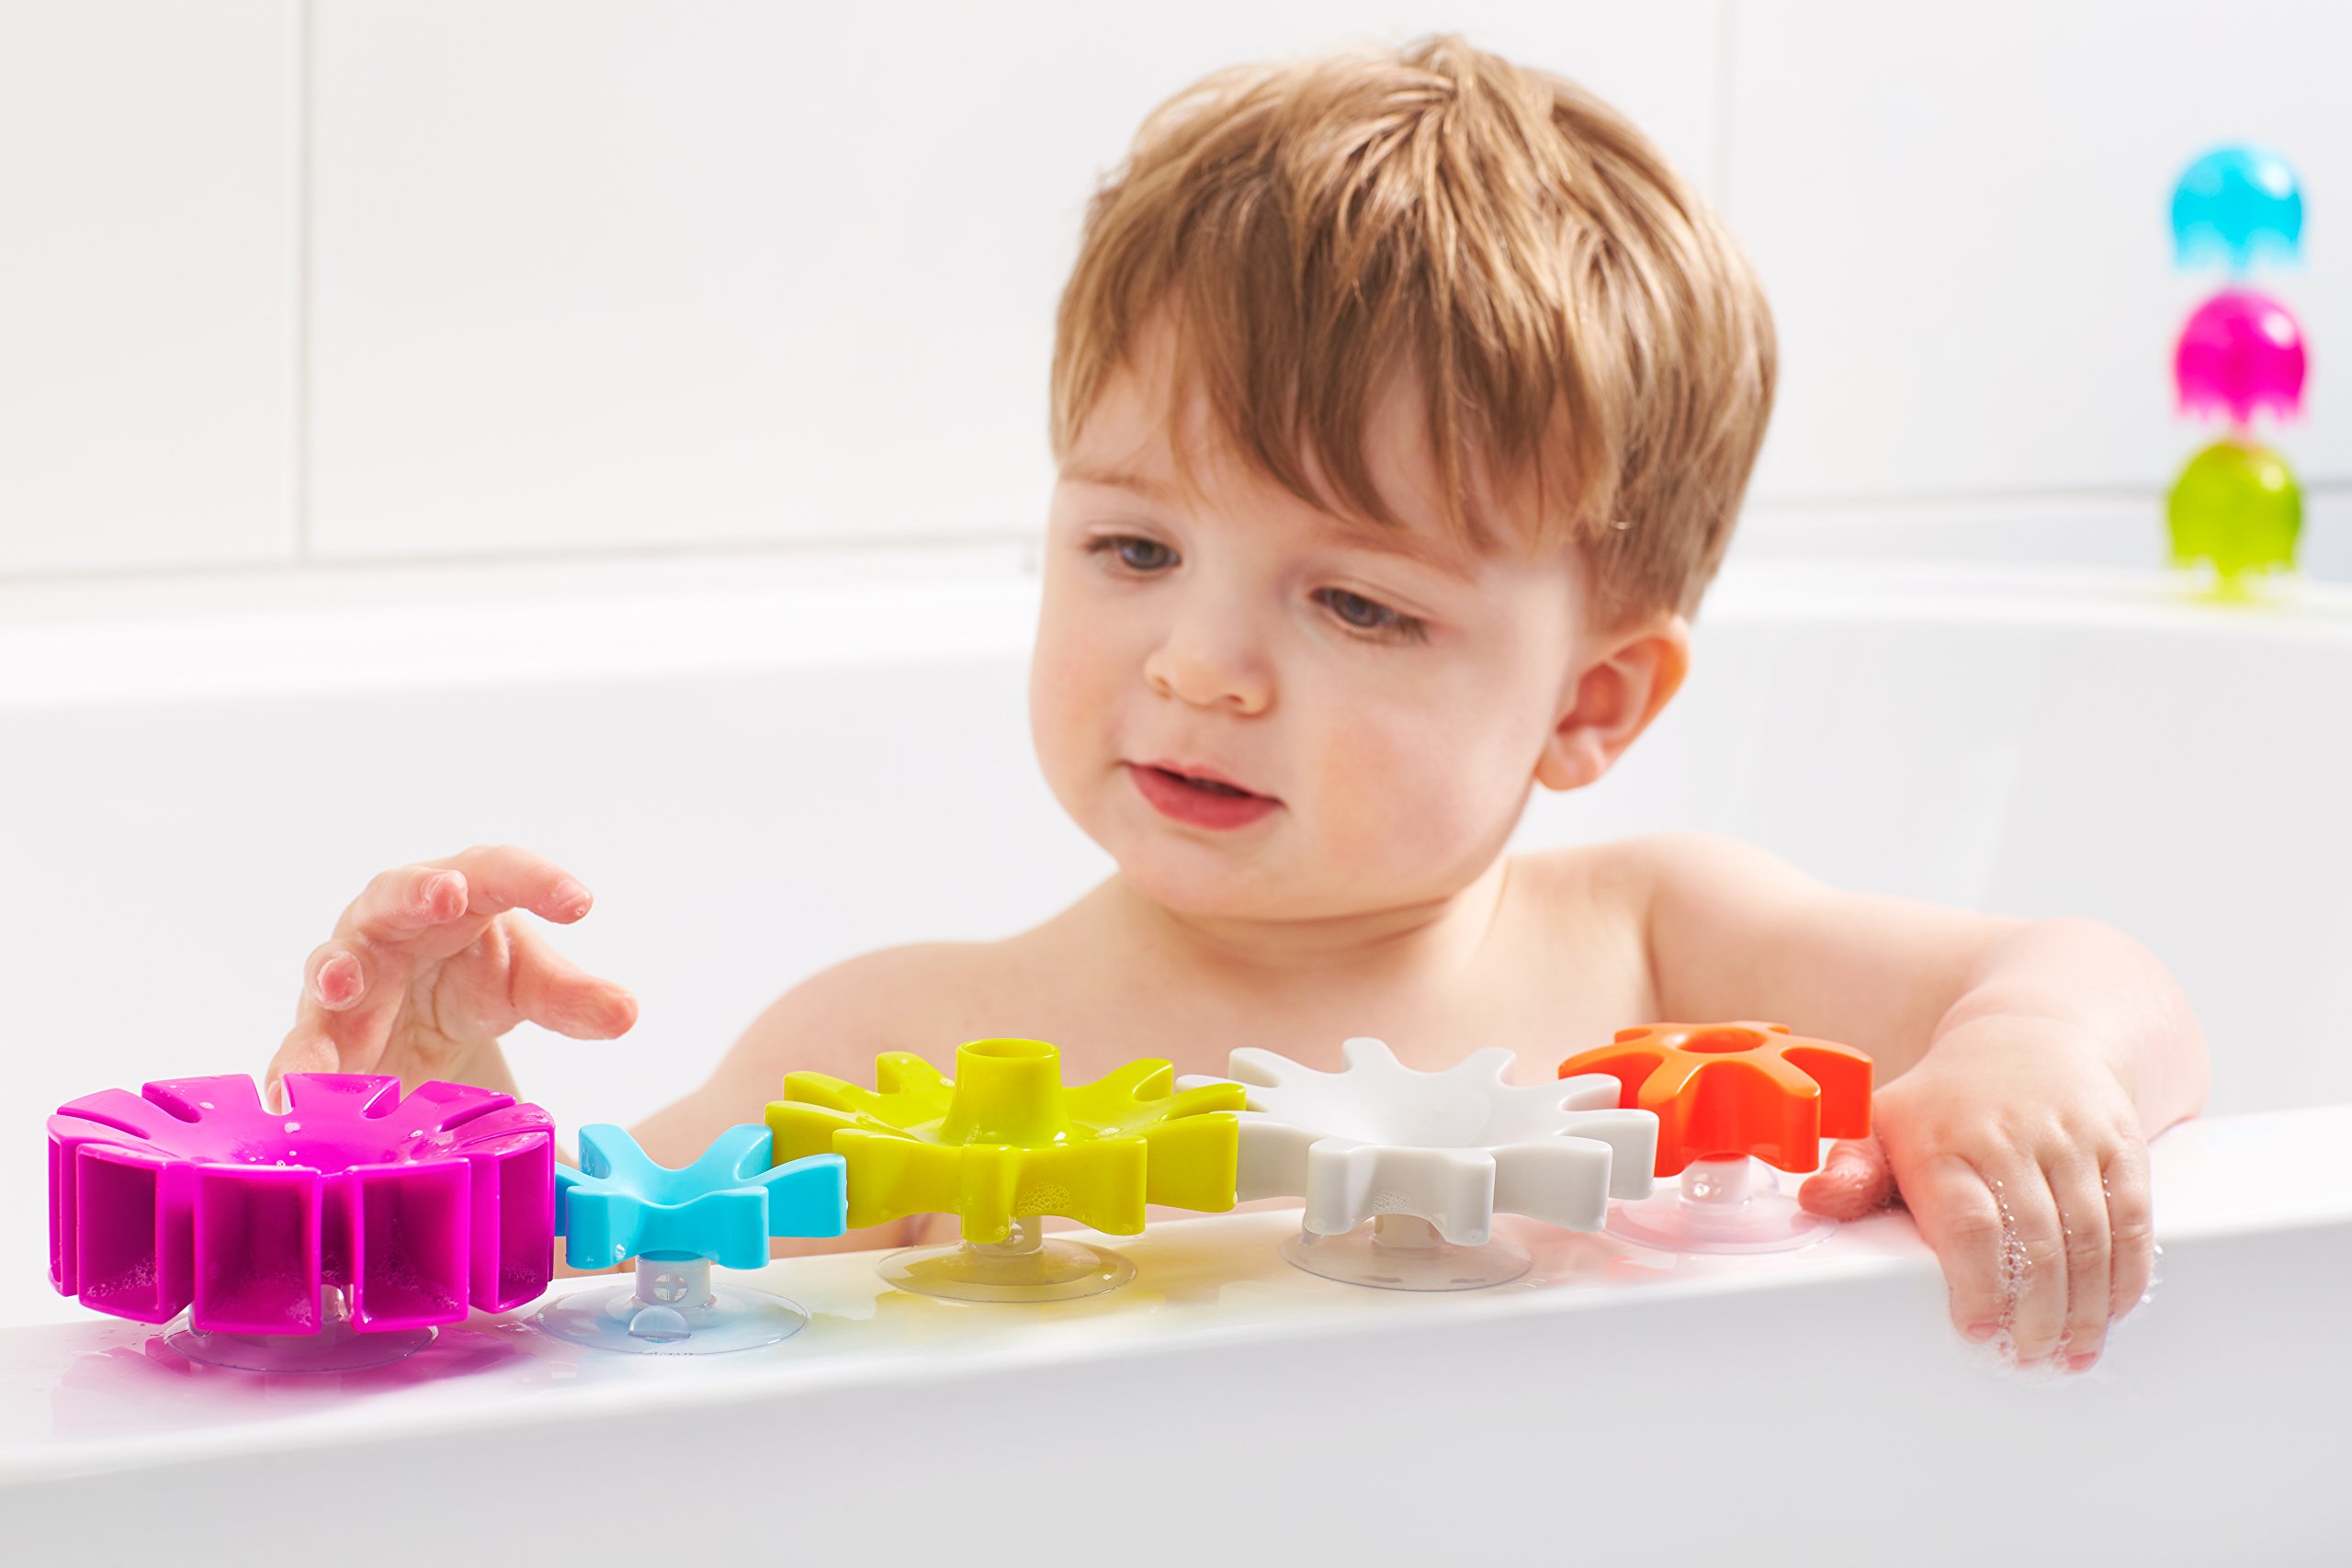 Boon COGS Baby Bath Toys - Gear Themed Sensory Baby Toys for Bathtub - Multicolored - Ages 12 Months and Up - 5 Count